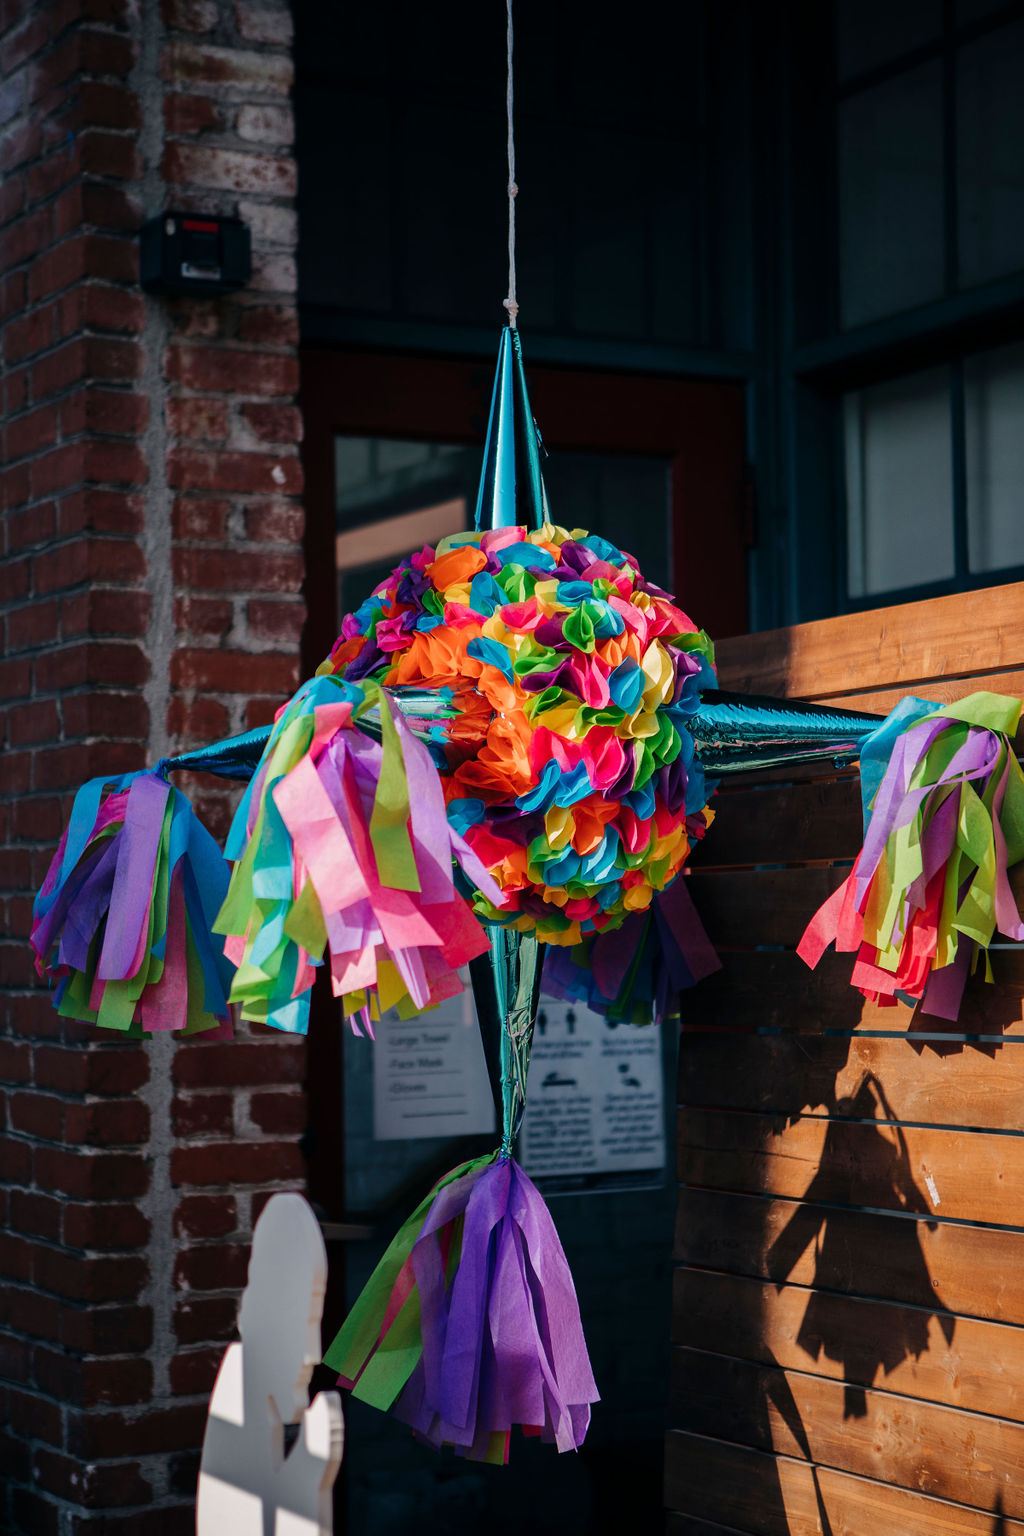 A party is not complete without a piñata from La Piñata Design Studio